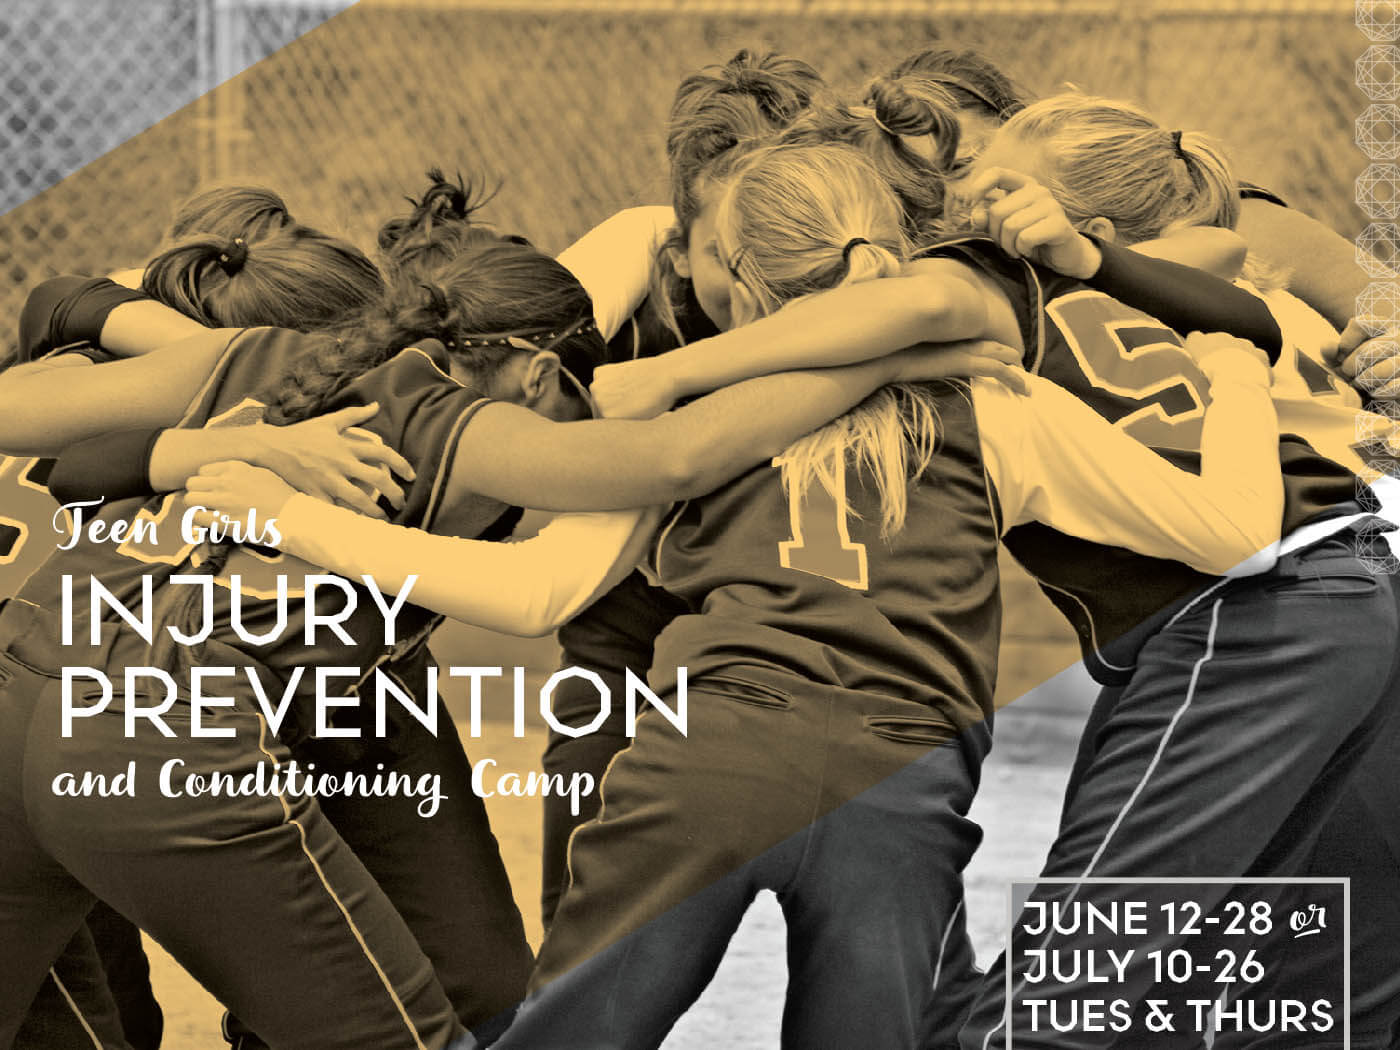 Teen Girls Injury Prevention and Conditioning Camp